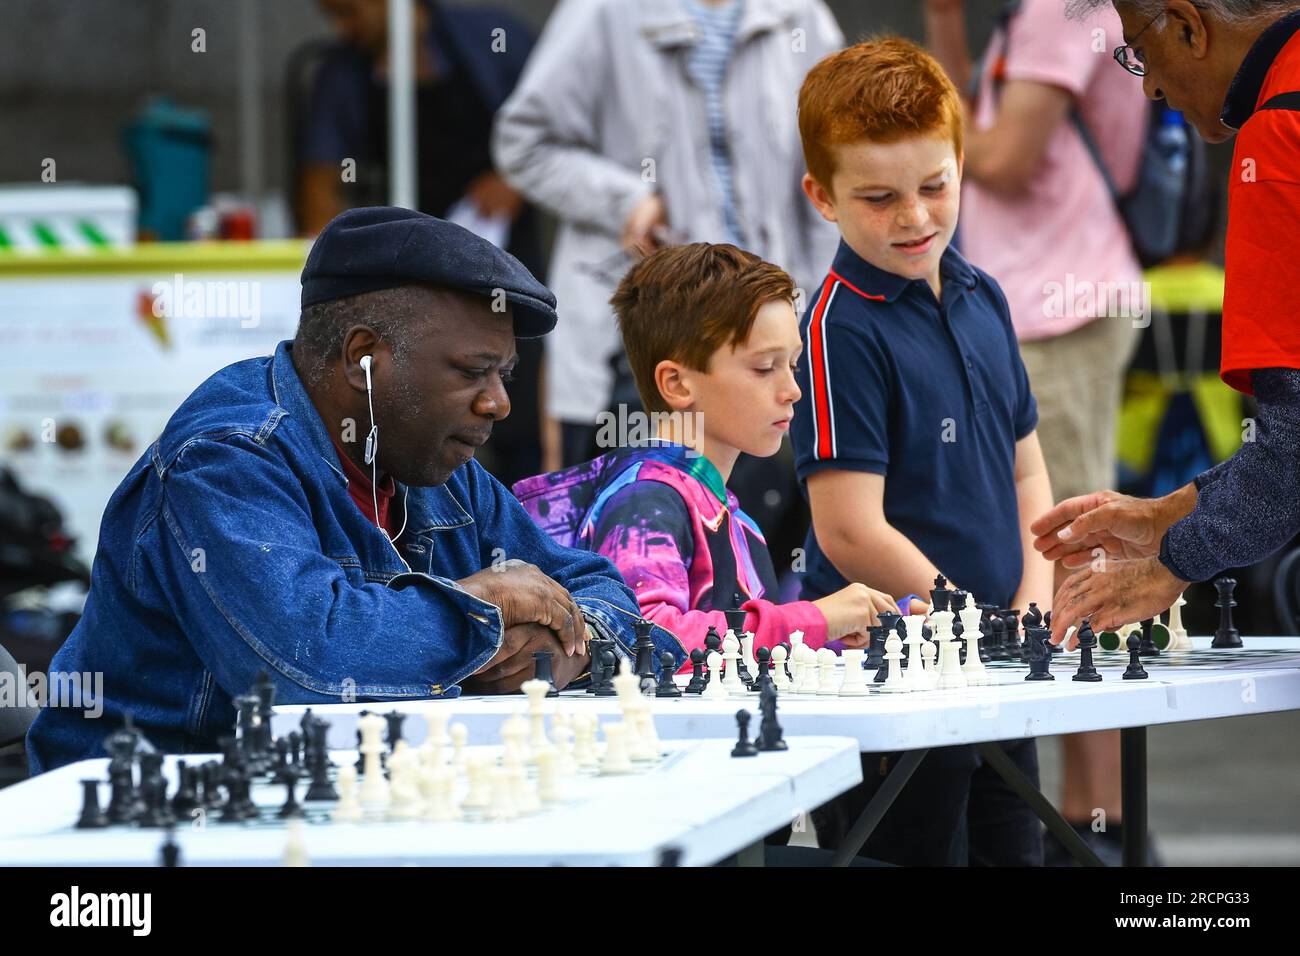 Max Williams (left) and Steve Philp compete in a round of chess